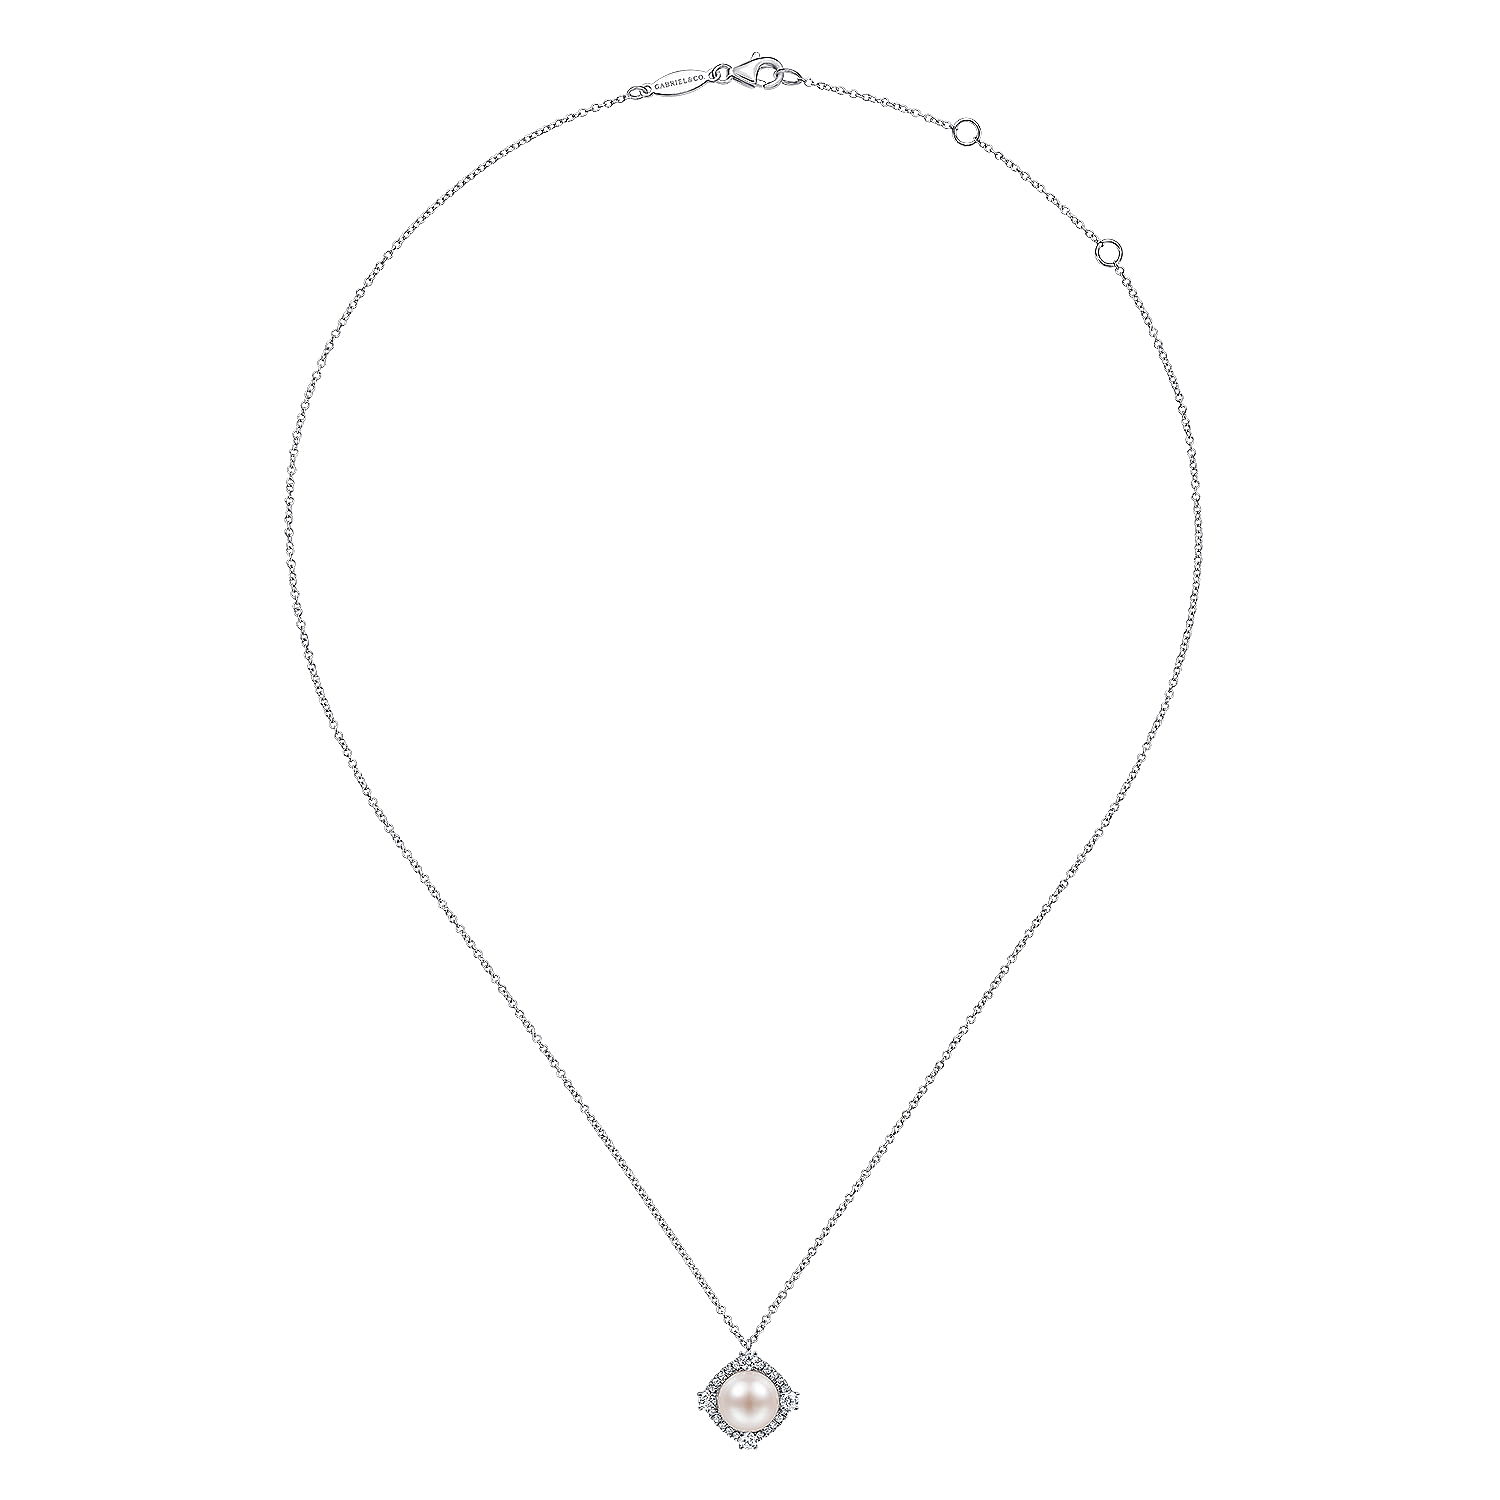 14K White Gold Cultured Pearl Pendant Necklace with Diamond Halo